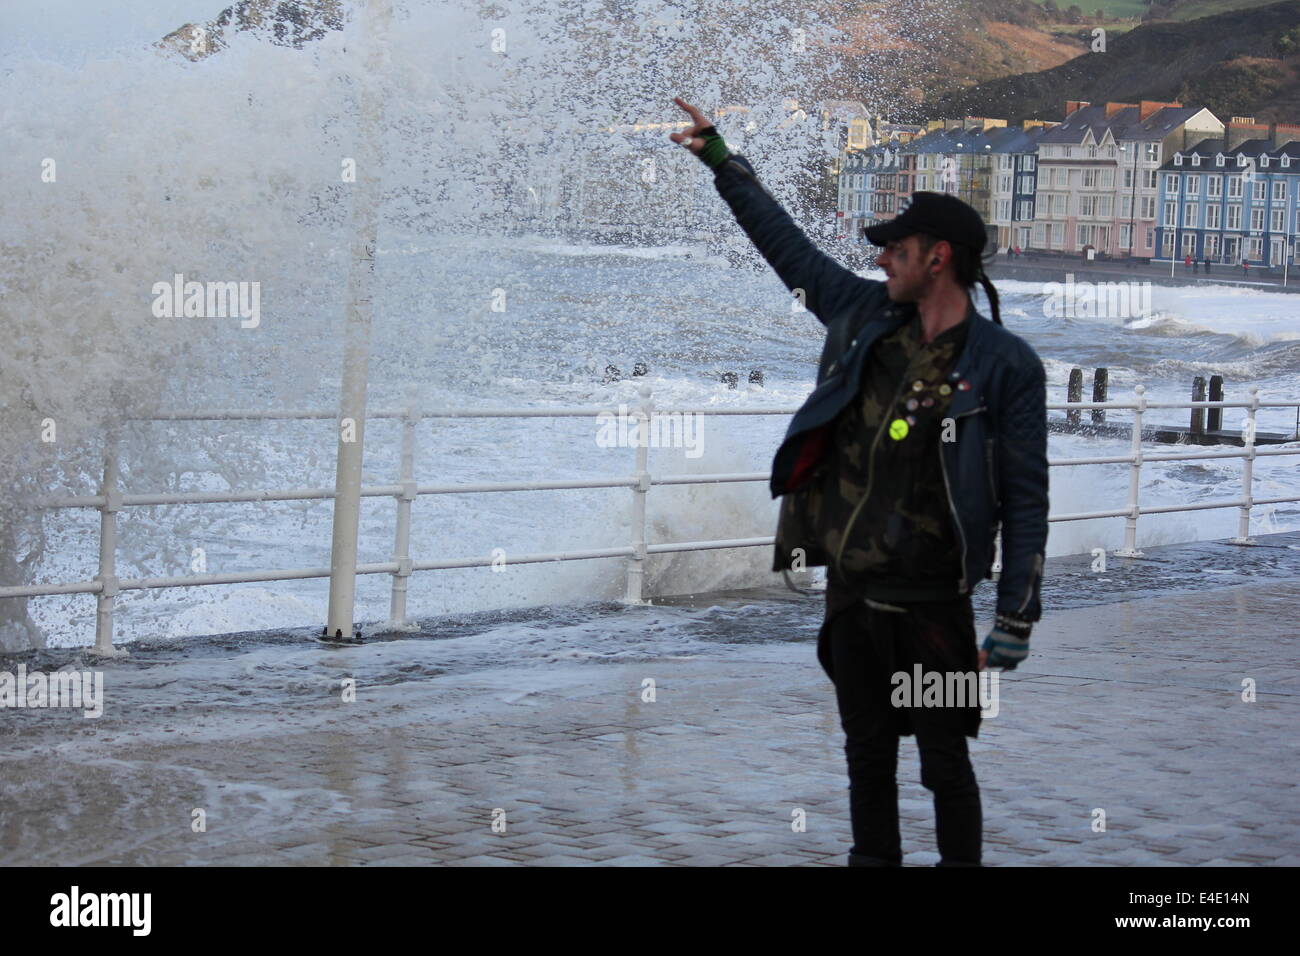 A punk style man posing in front of stormy seas on aberystwyth promenade Stock Photo